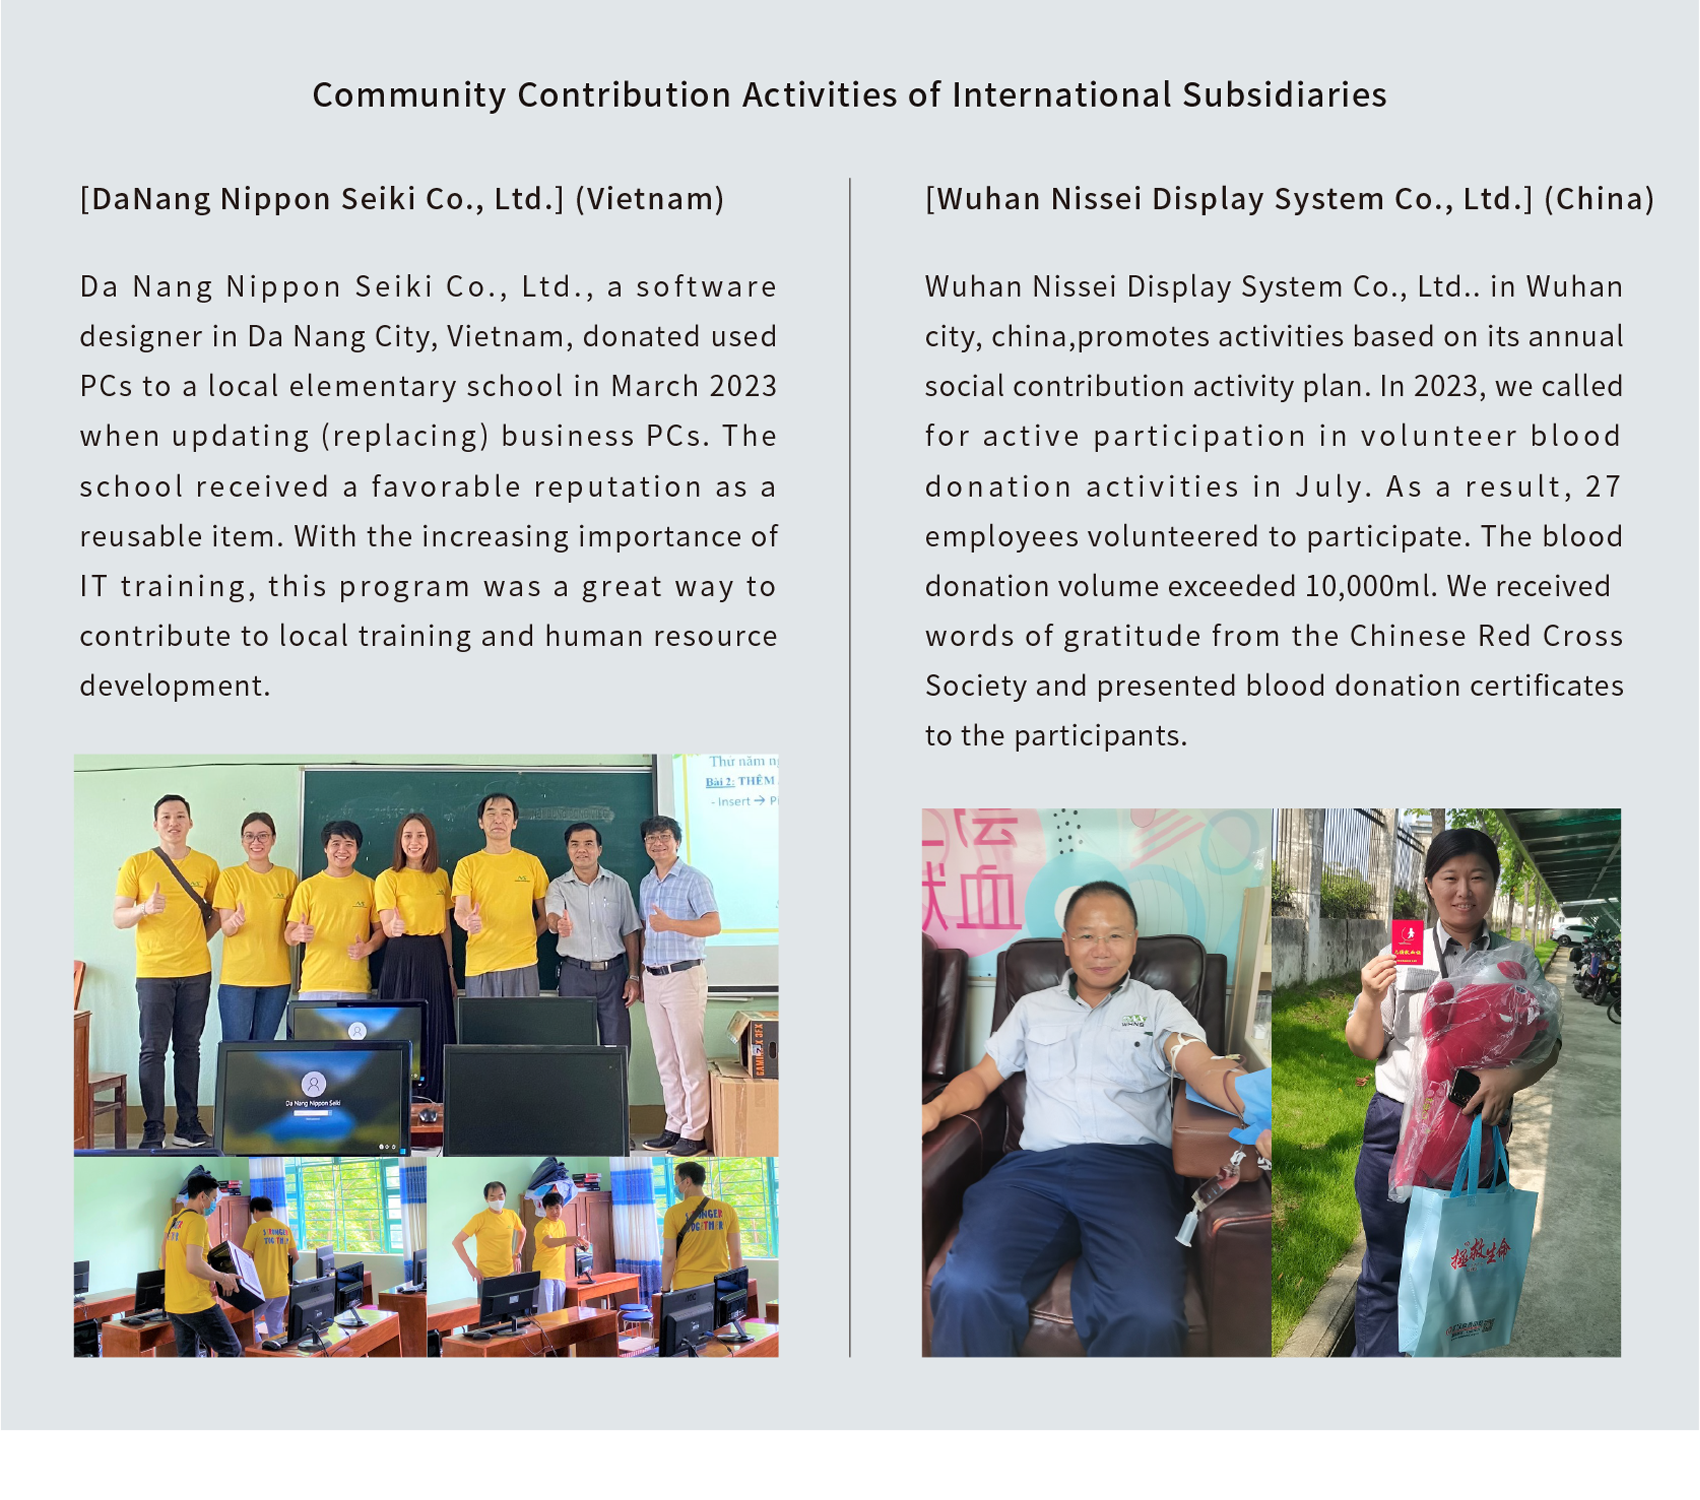 Our social contribution activities at overseas subsidiaries